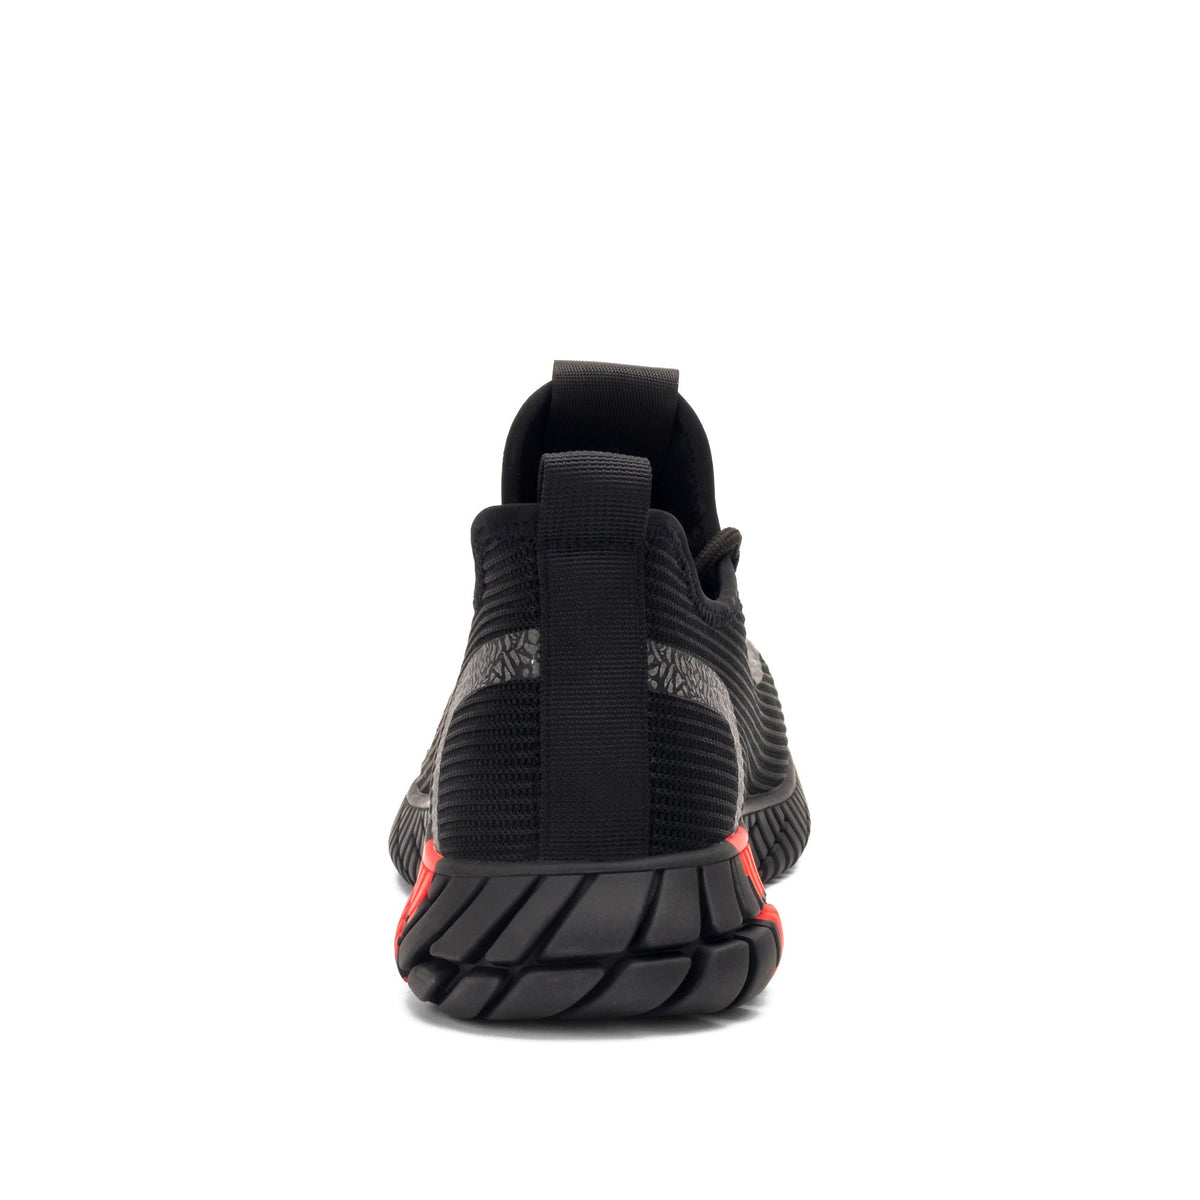 S Series Black Red - Indestructible Shoes